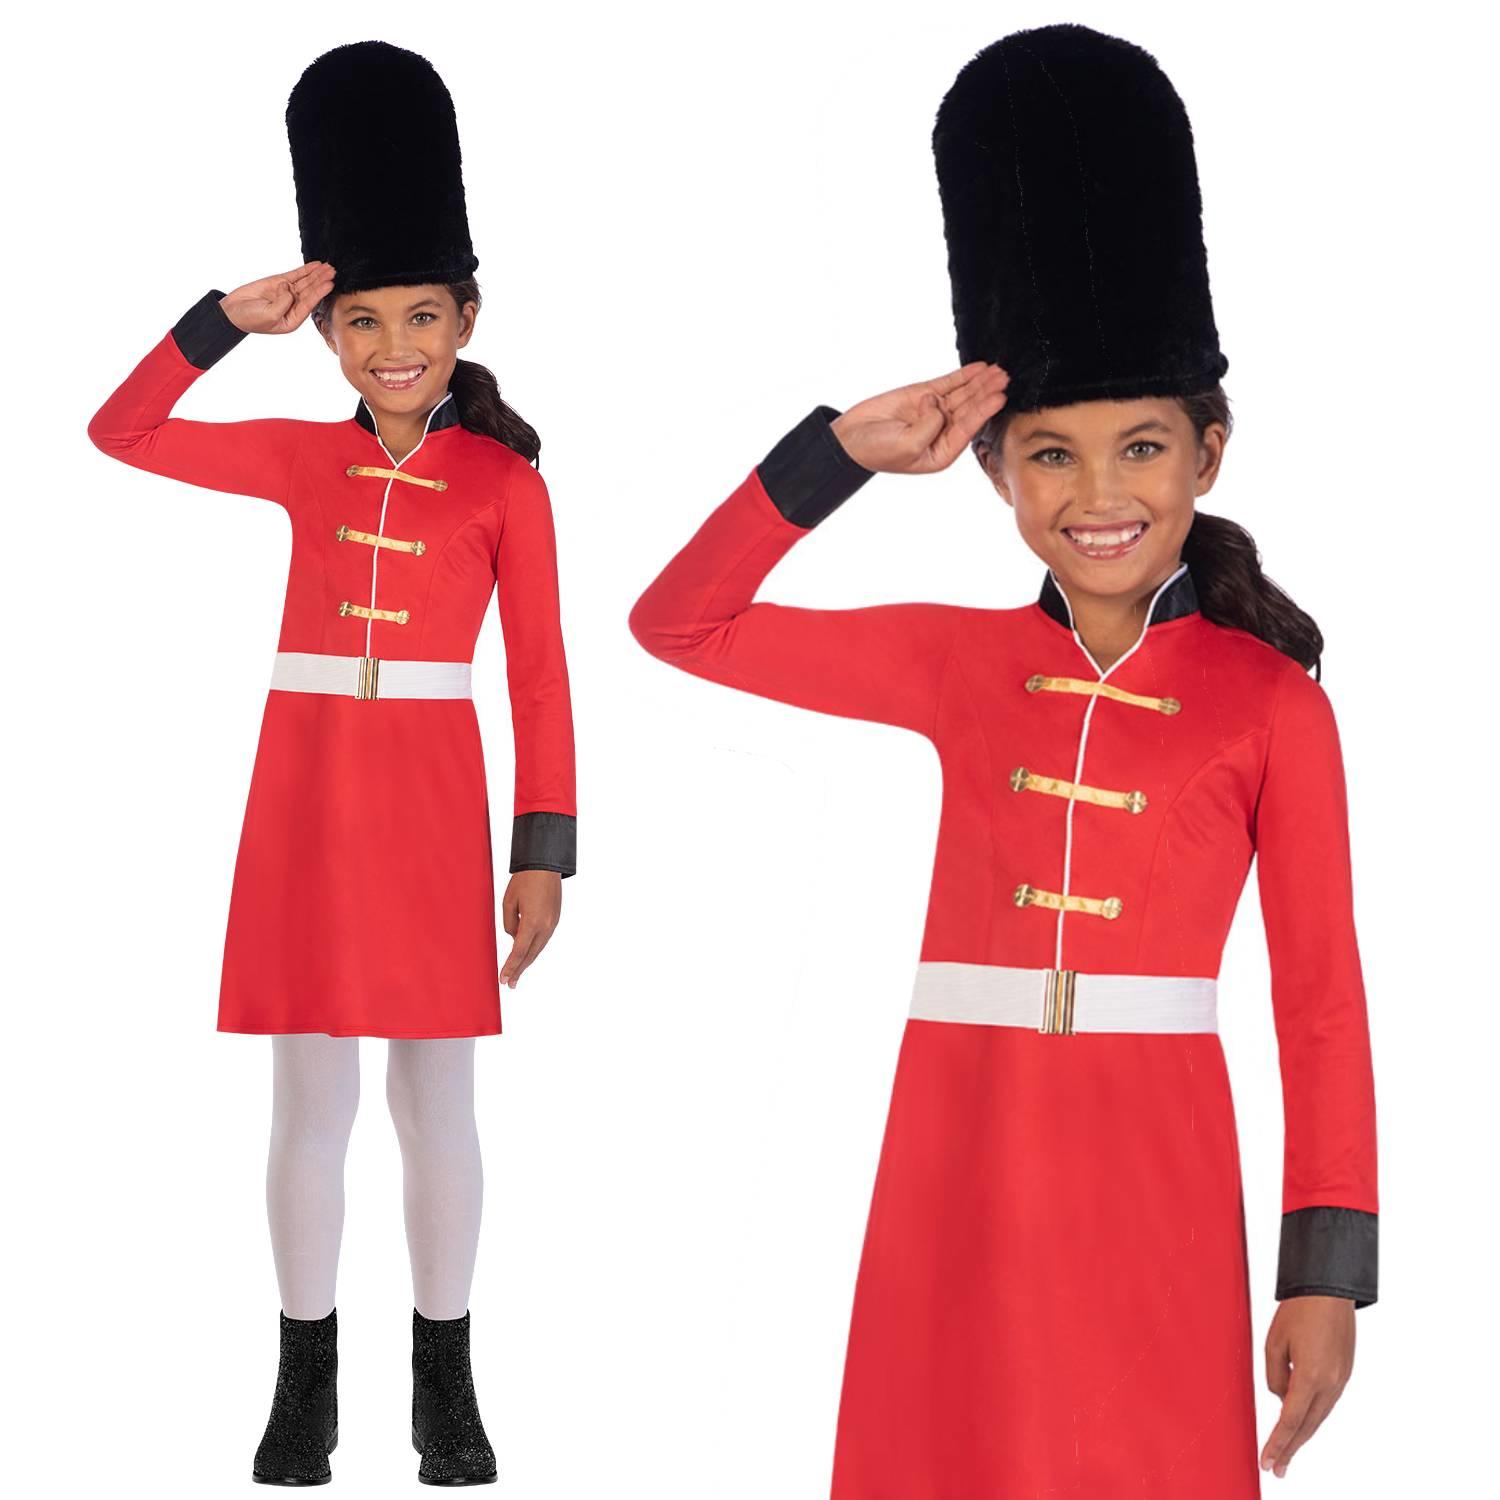 Royal Guard Fancy Dress Costume for Girls by Amscan 9909021 sml, med and large available here at Karnival Costumes online party shop